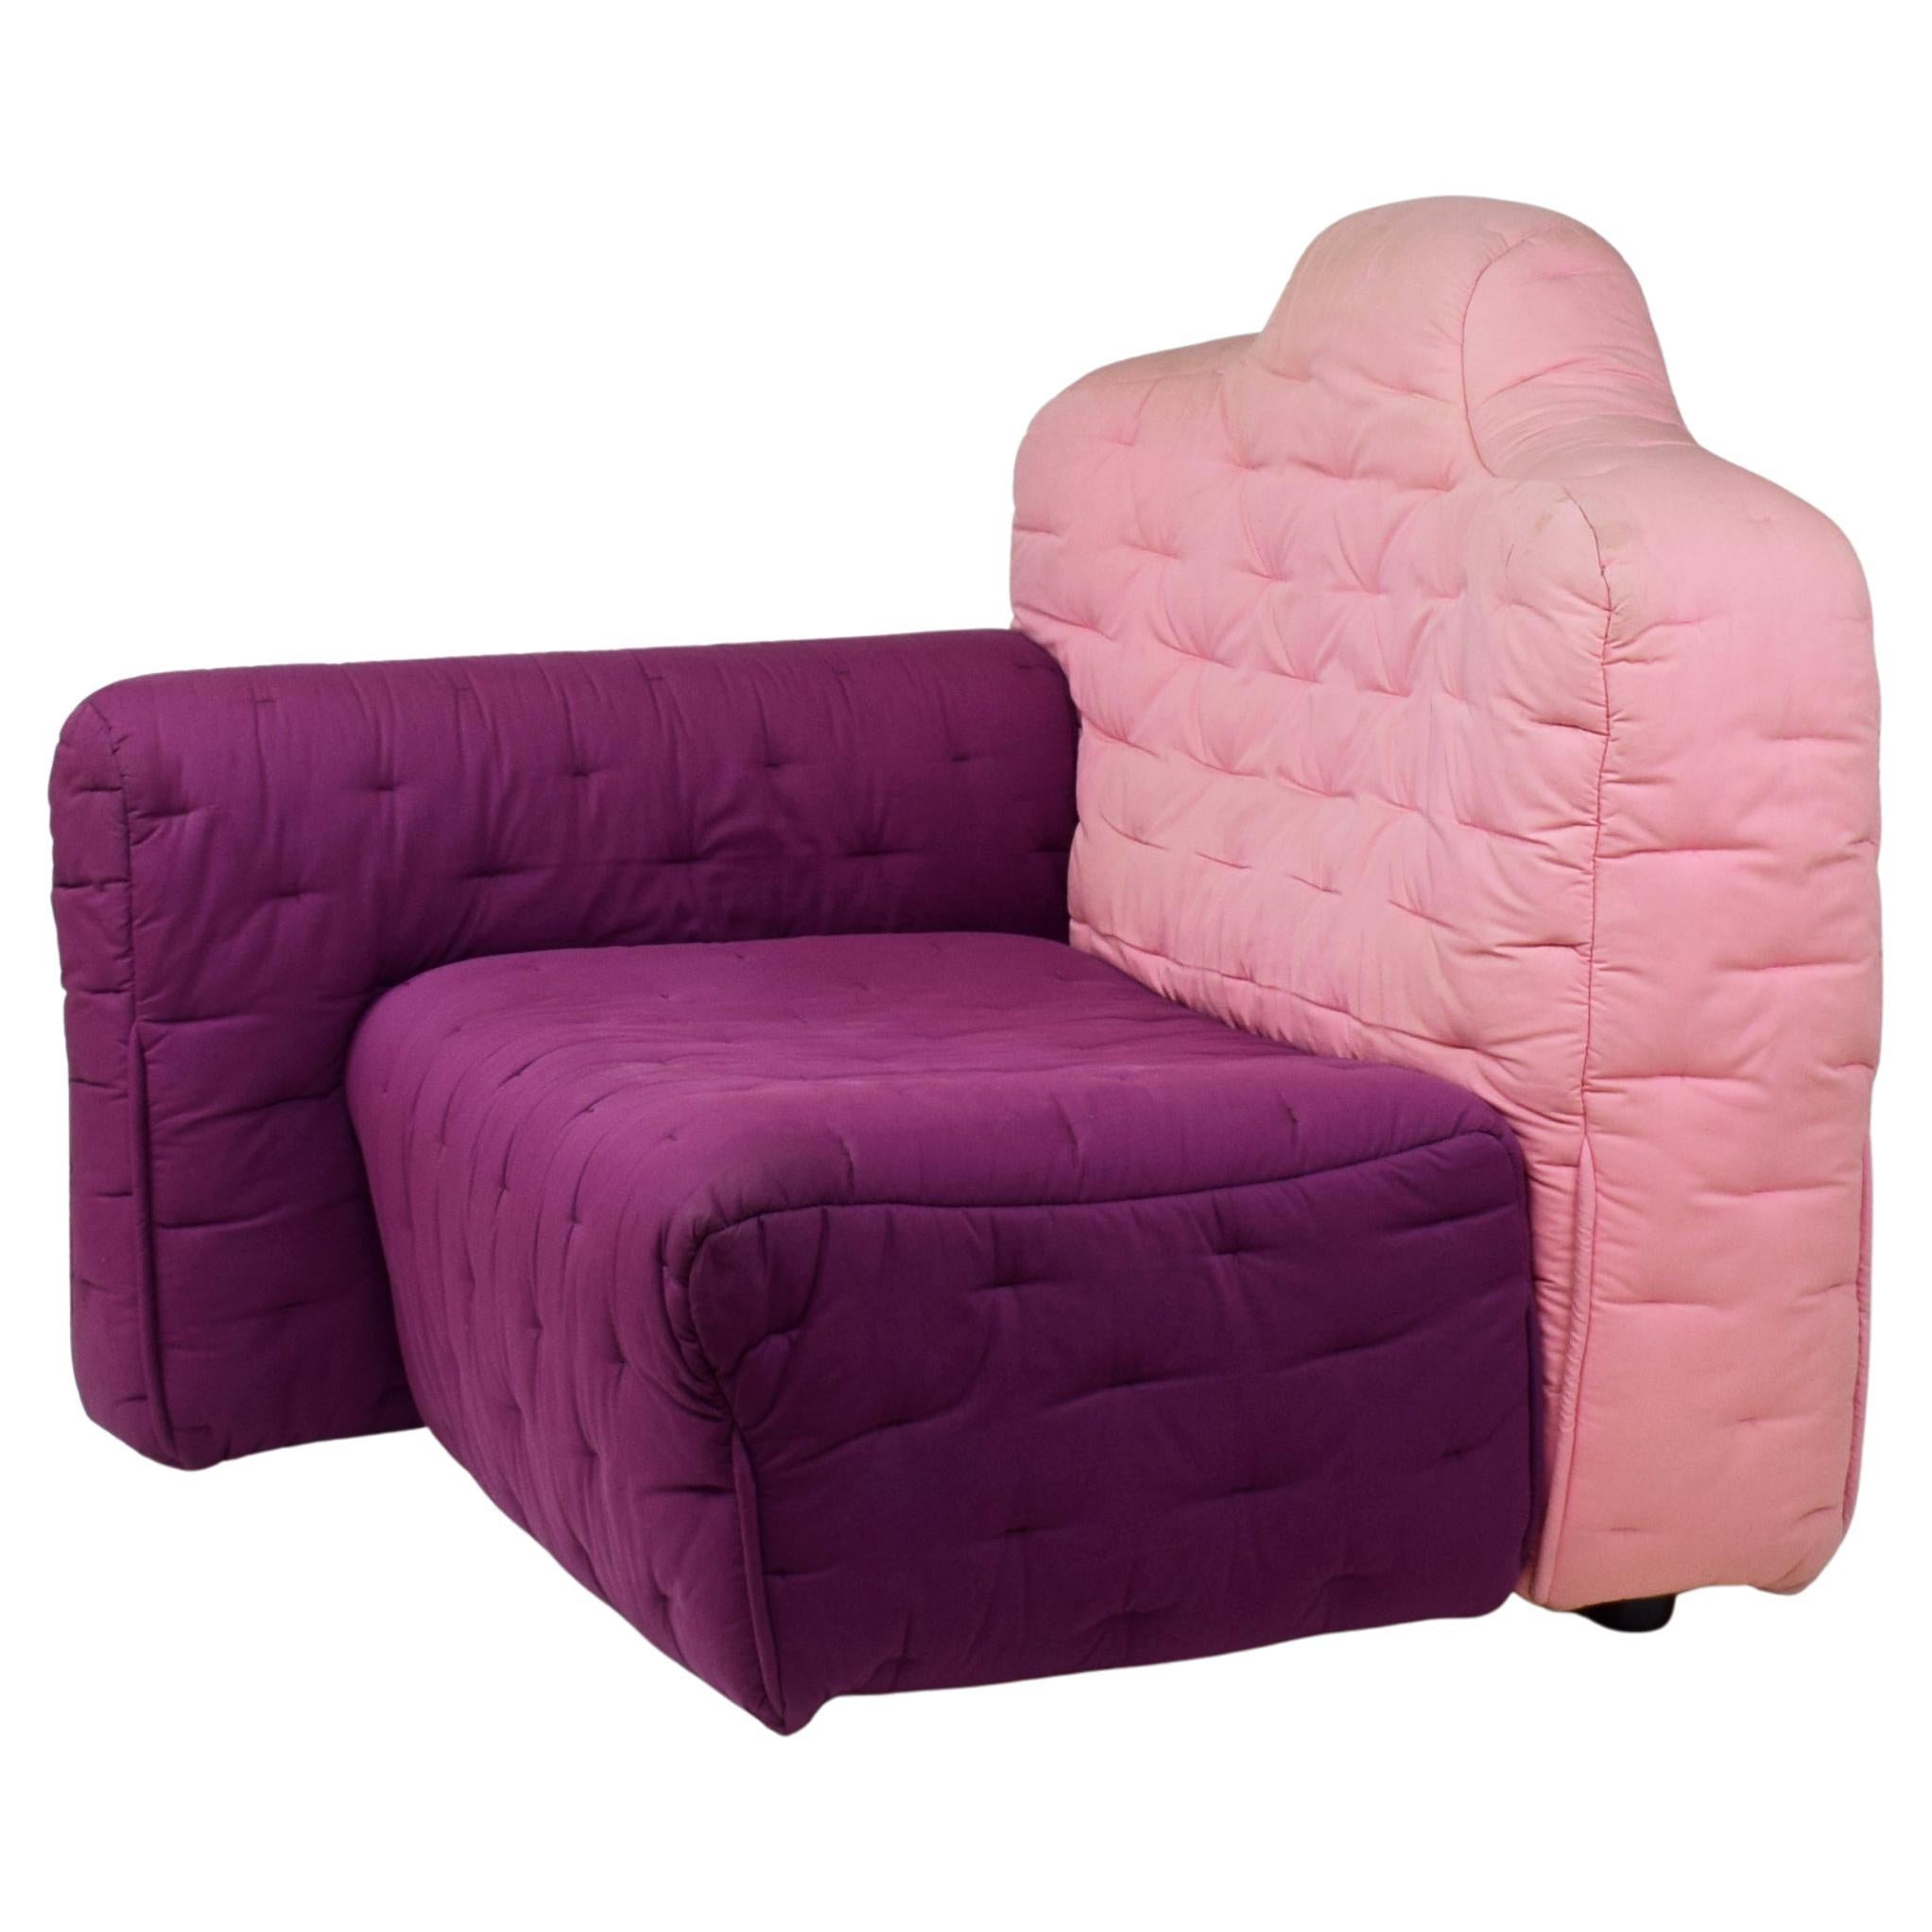 Gaetano Pesce, 'Cannaregio' Armchair, Cassina Italy 1987, Large Pink and Purple For Sale